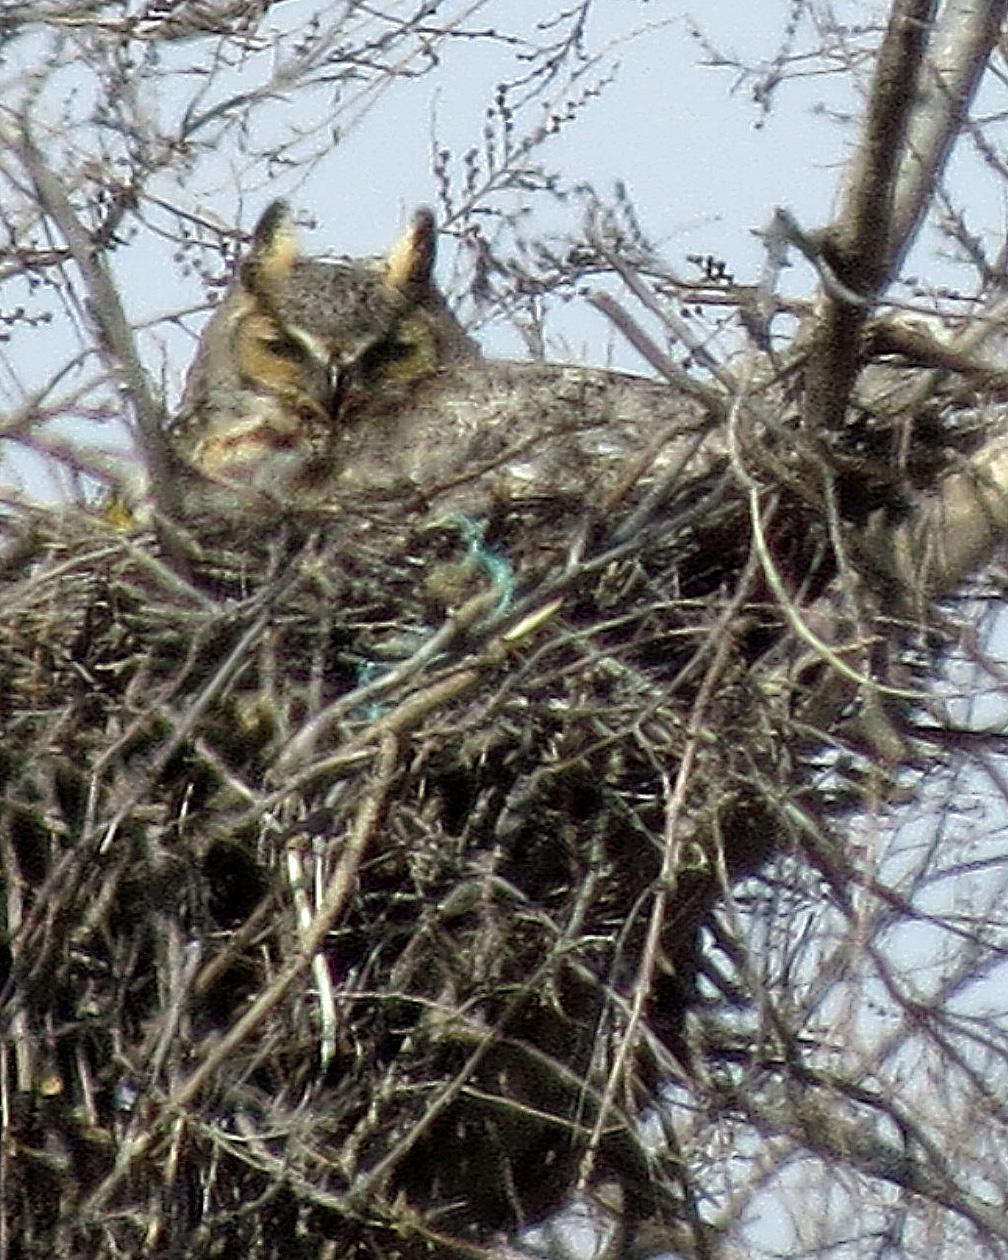 Great Horned Owl Photo by Kelly Preheim